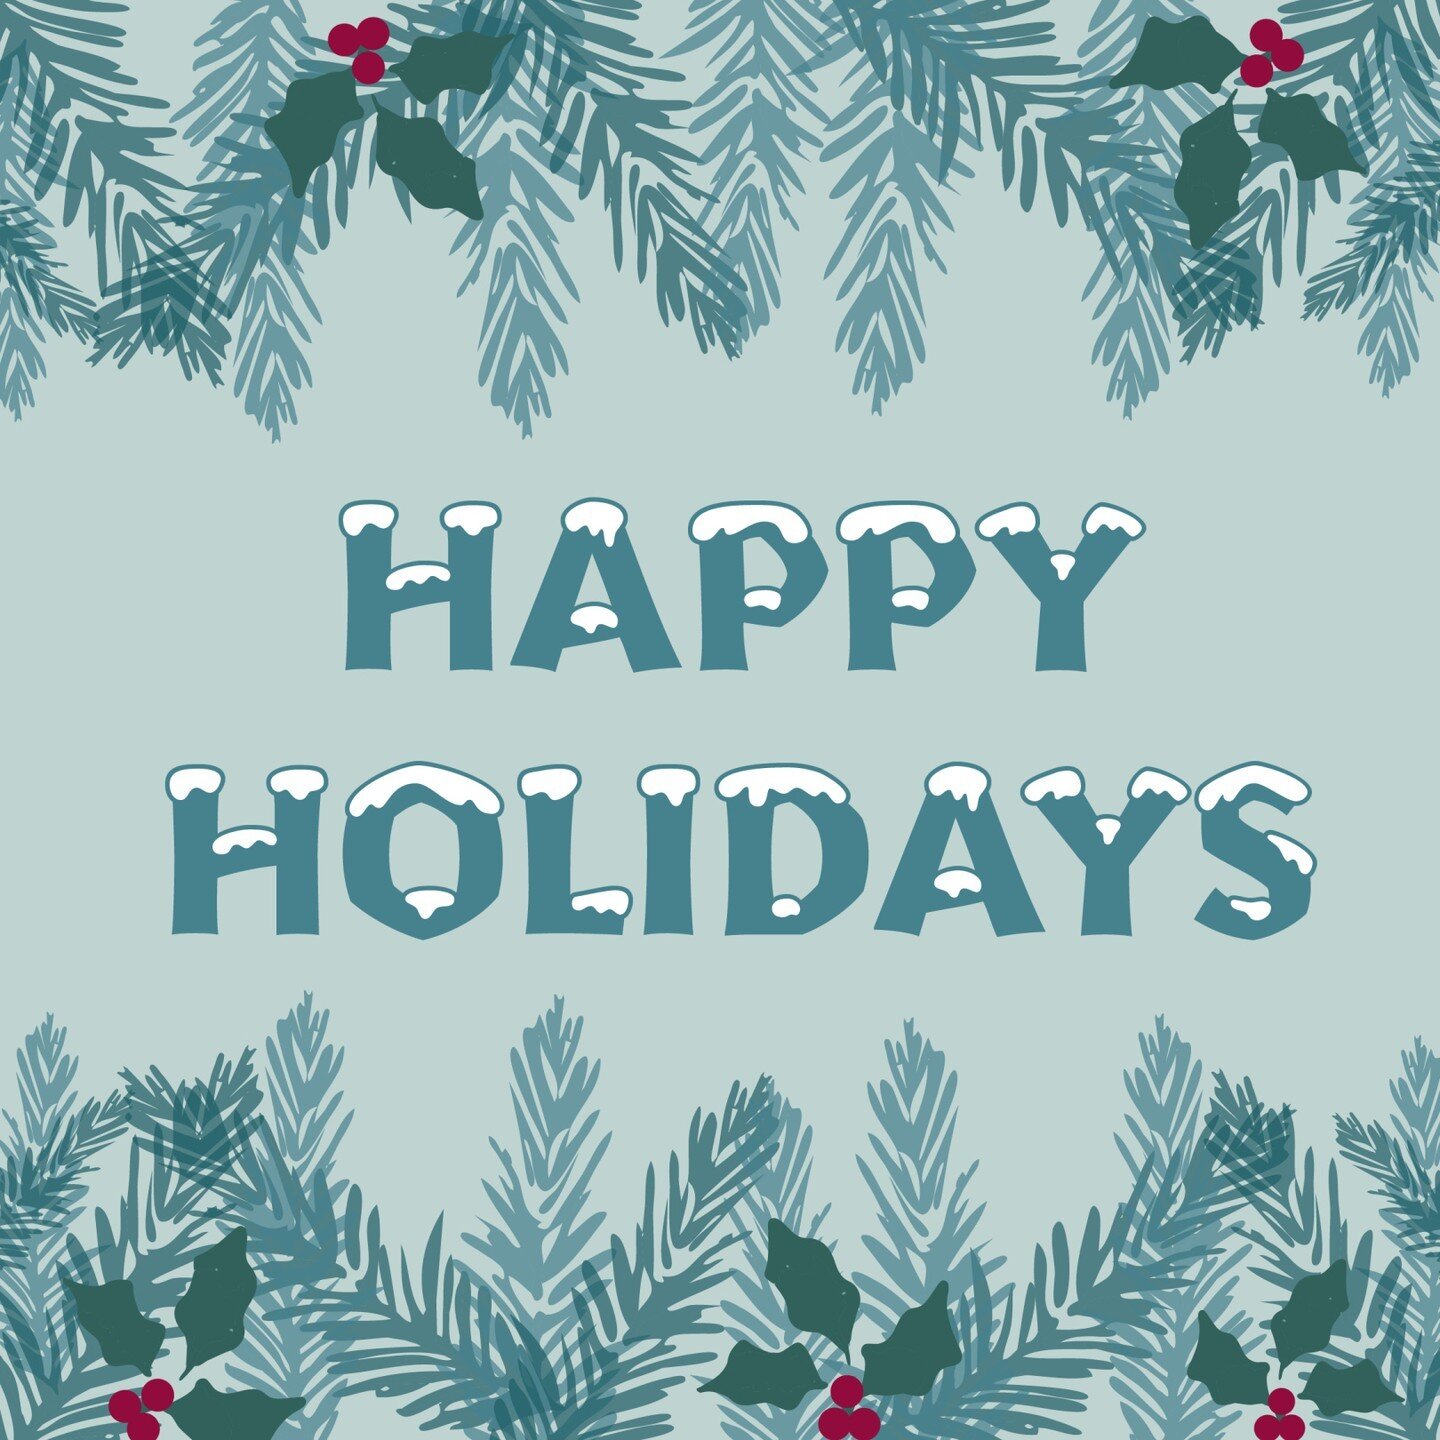 Happy holidays! A huge thank you to our amazing clients who allowed us to continue to push the boundaries of our design practice, the hard work of our contractors who bring our designs to life, and the professional partnerships and collaborations wit